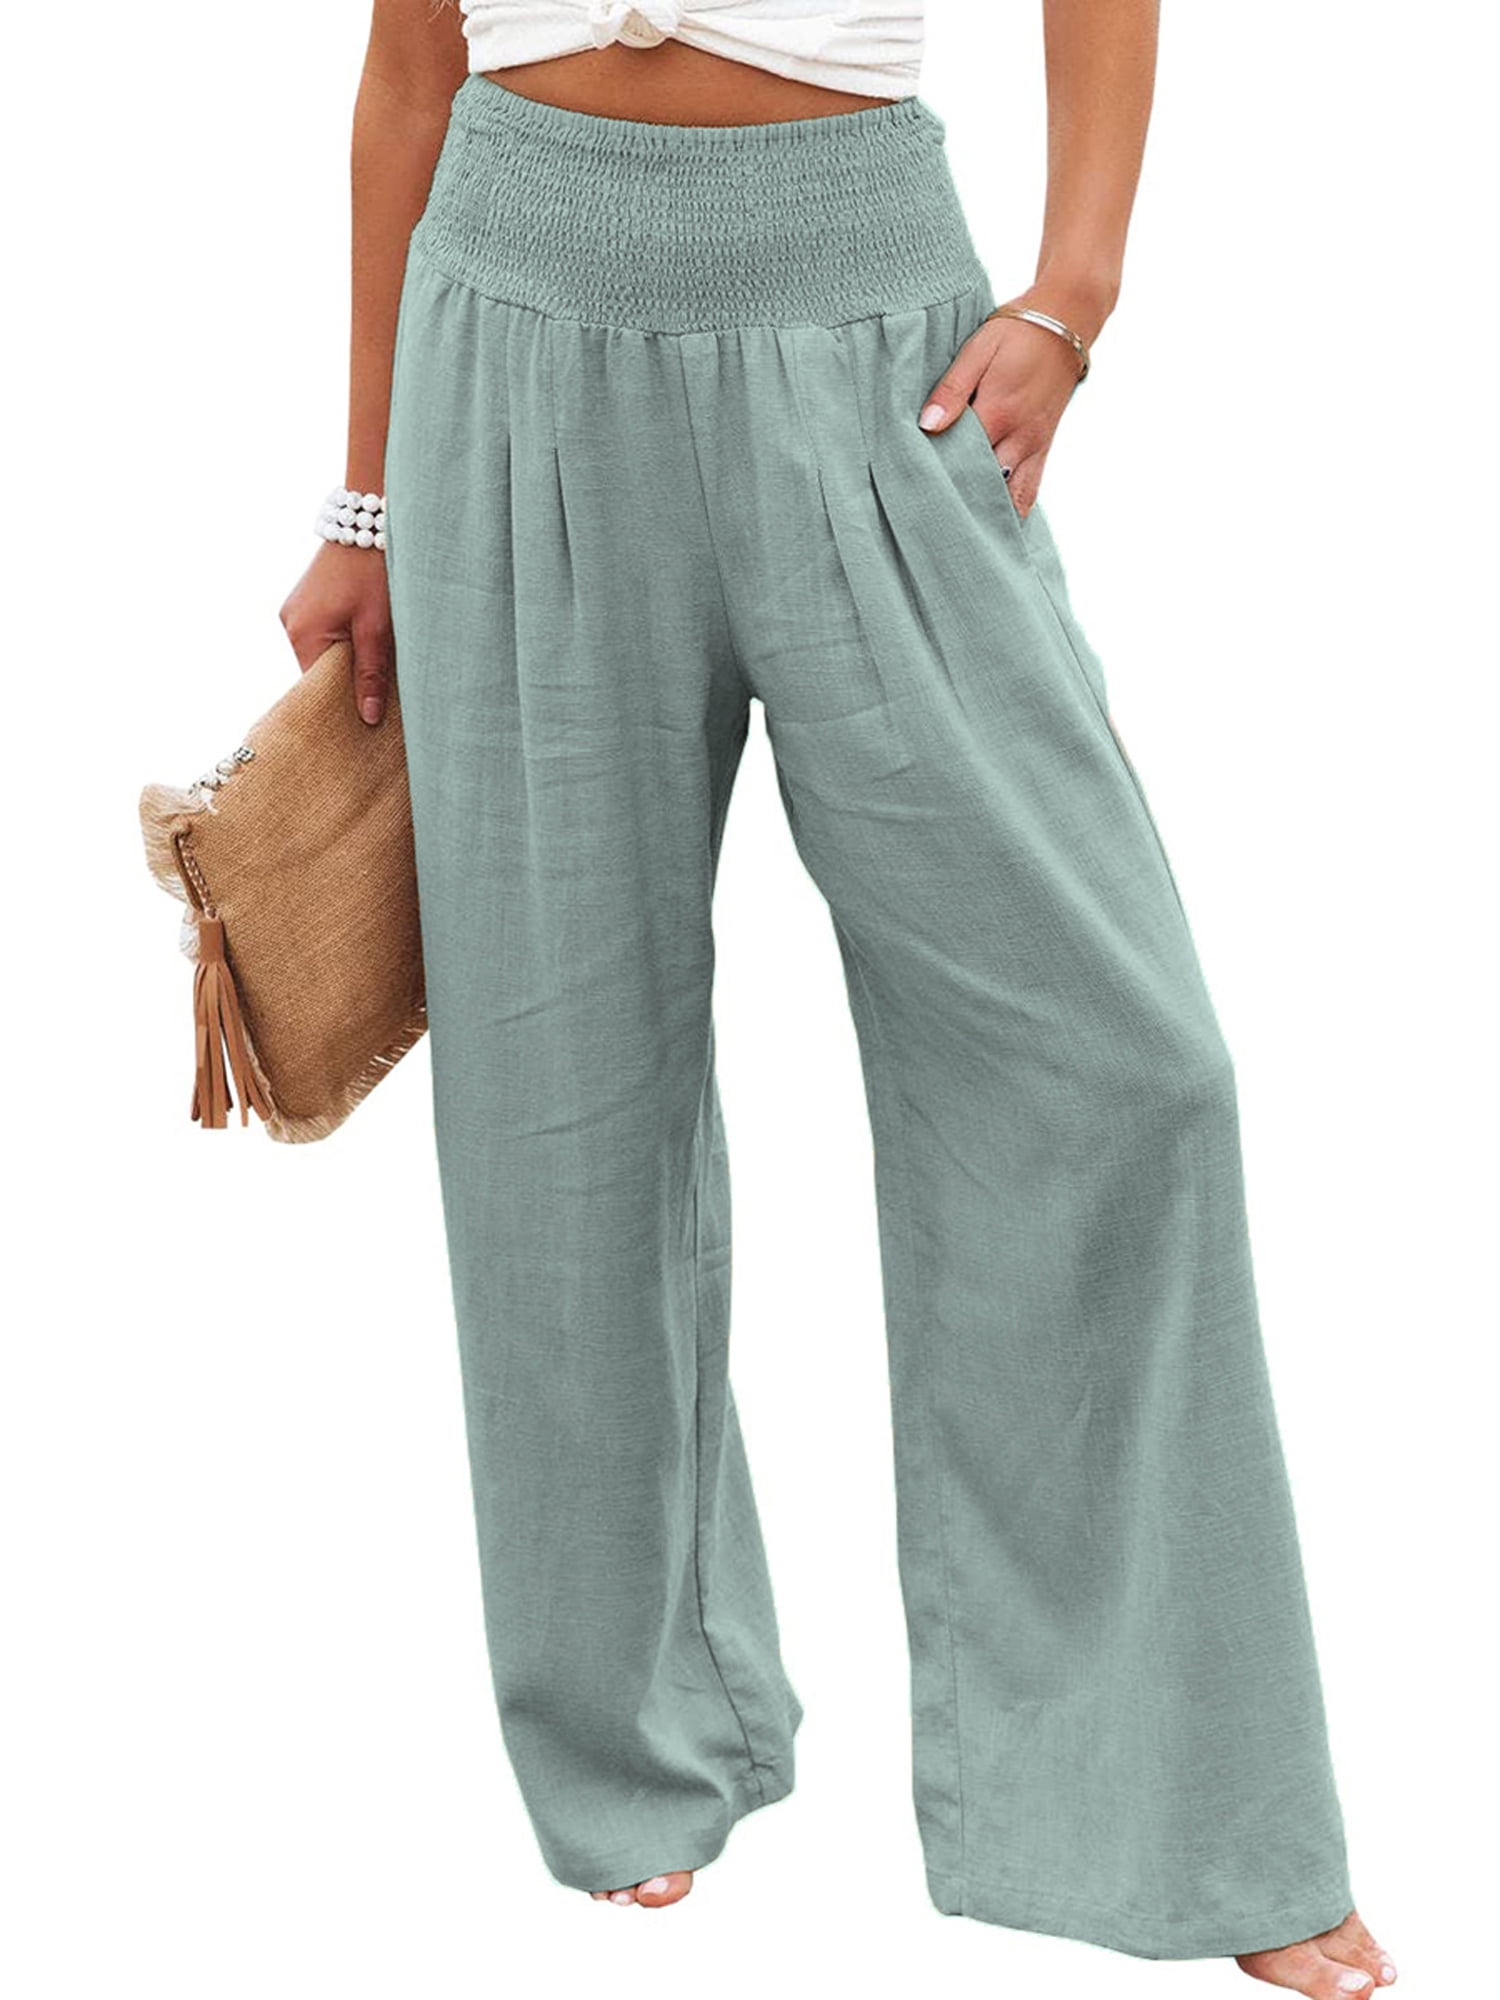 Buy Womens Cotton Linen Blend Baggy Straight Pants Fashion Casual Pockets  Solid Color Soft Comfortable Trousers for Work at Amazon.in